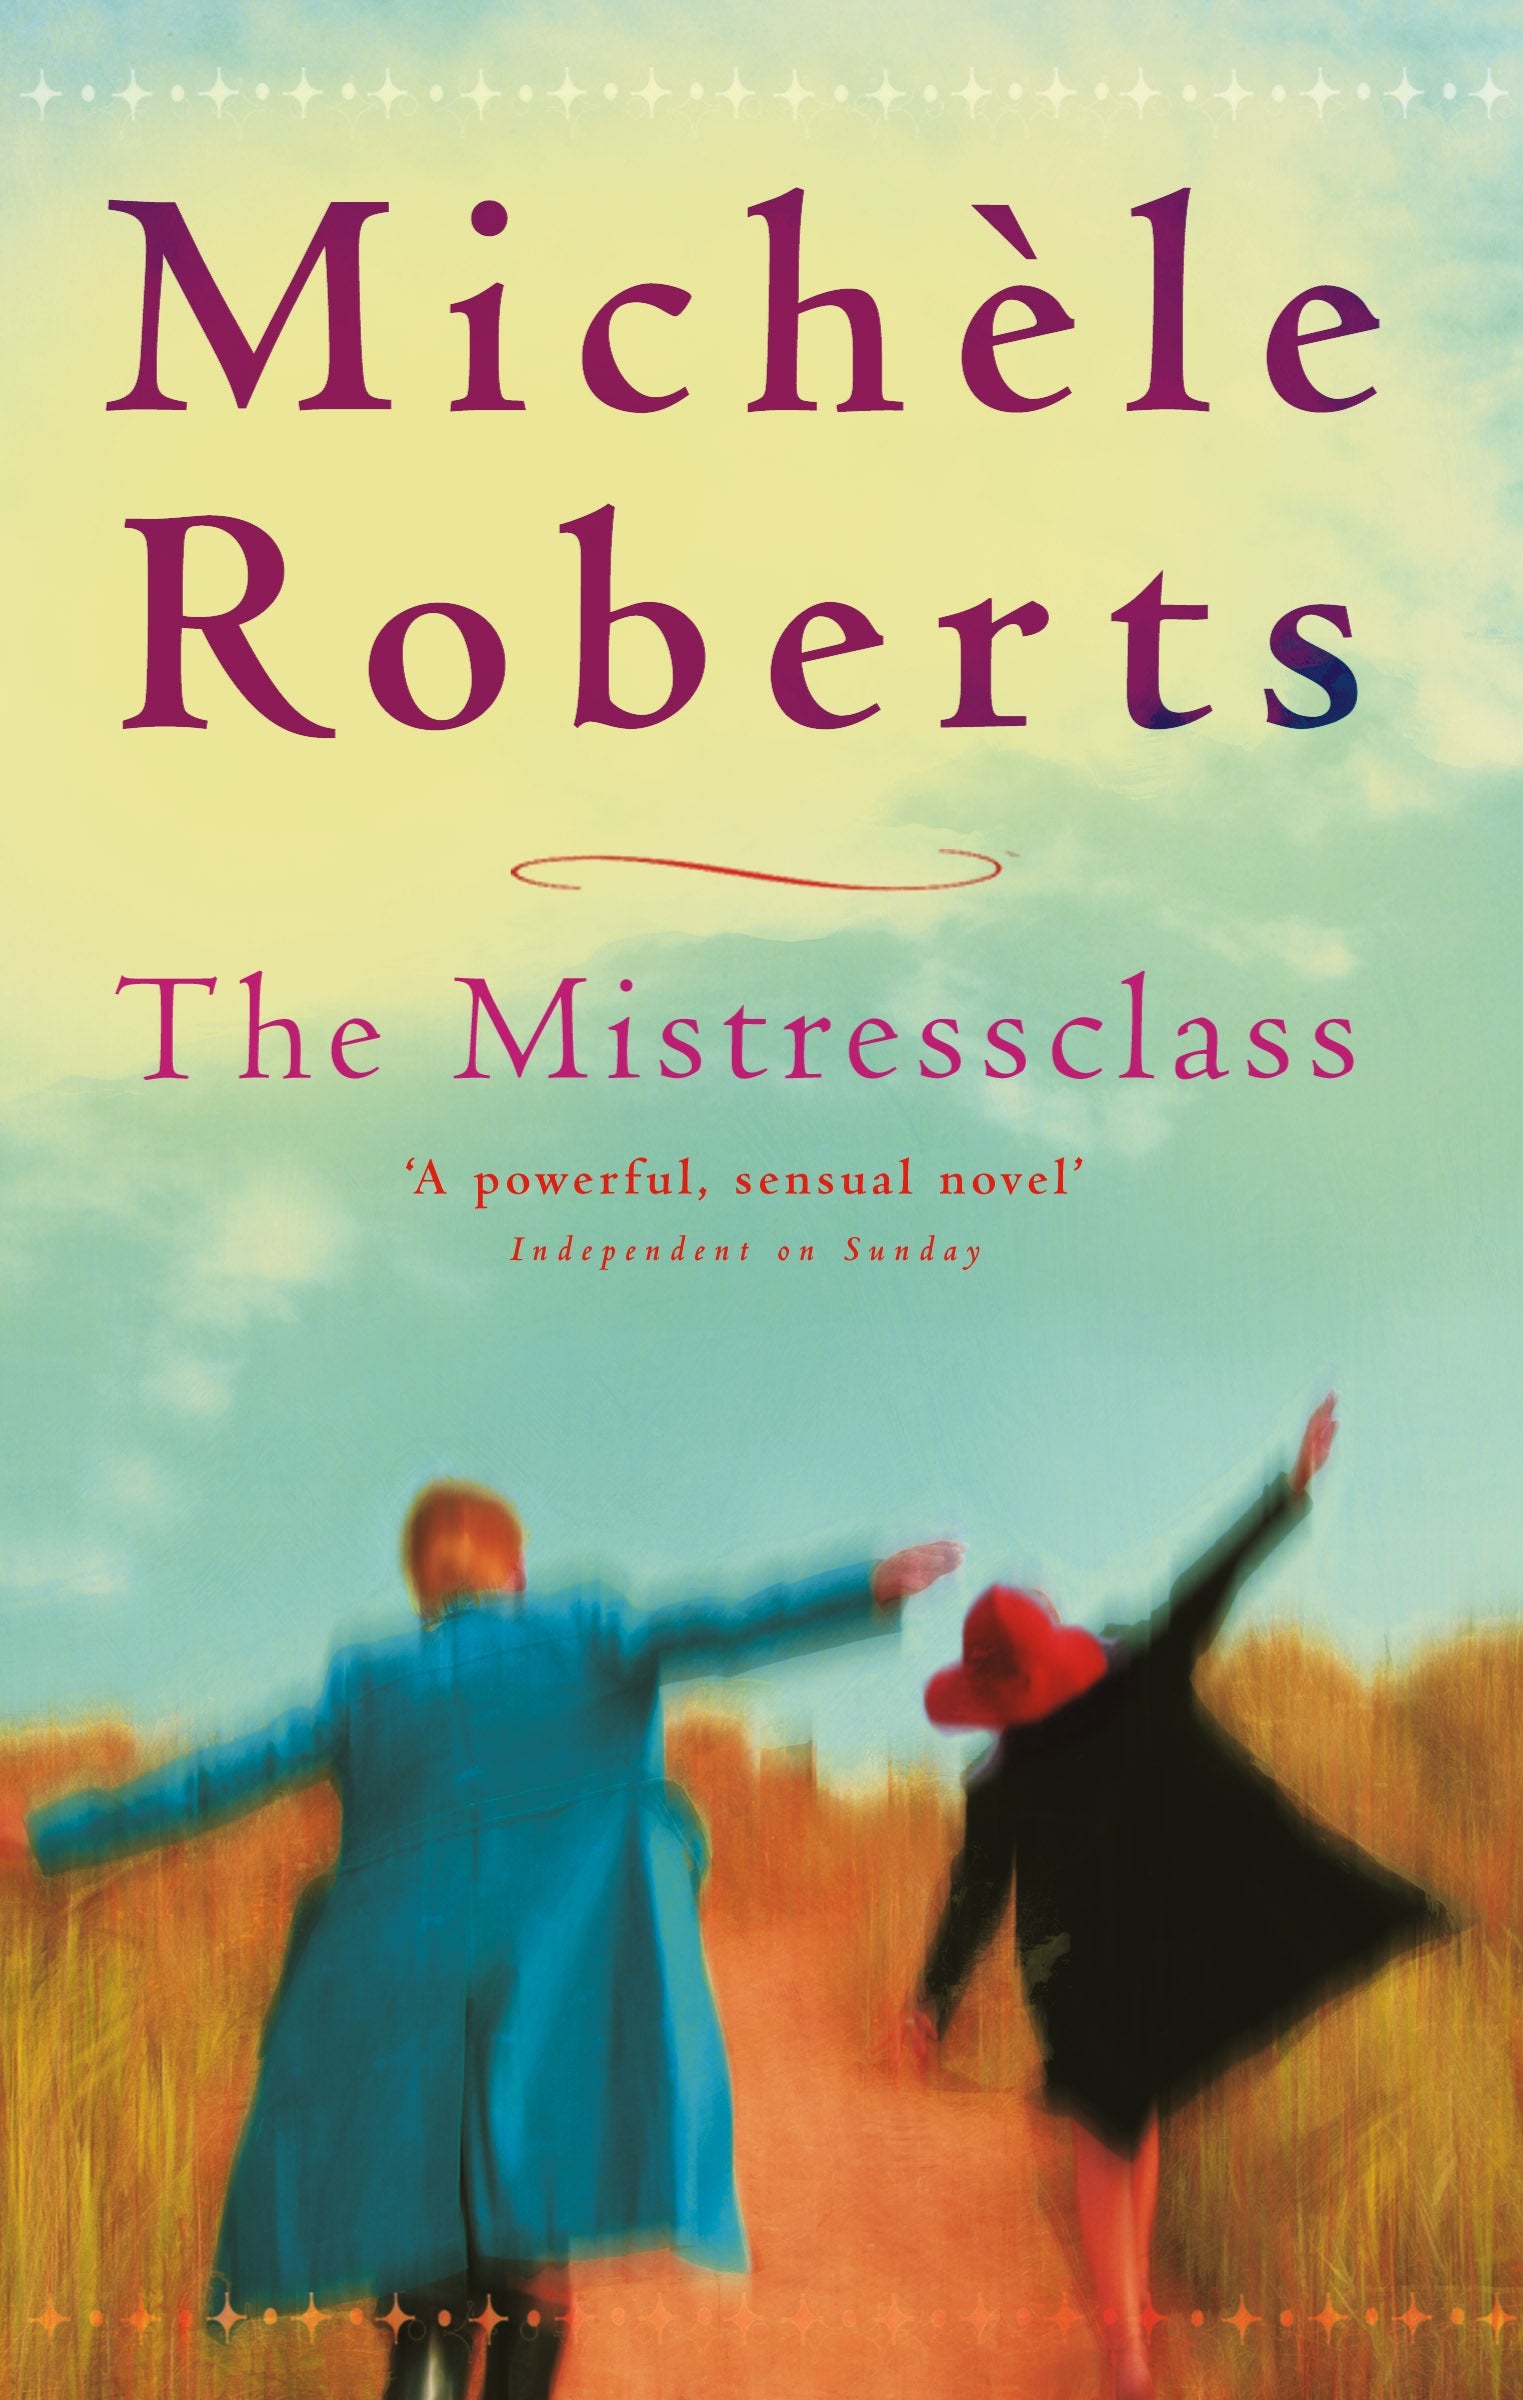 The Mistressclass by Michele Roberts